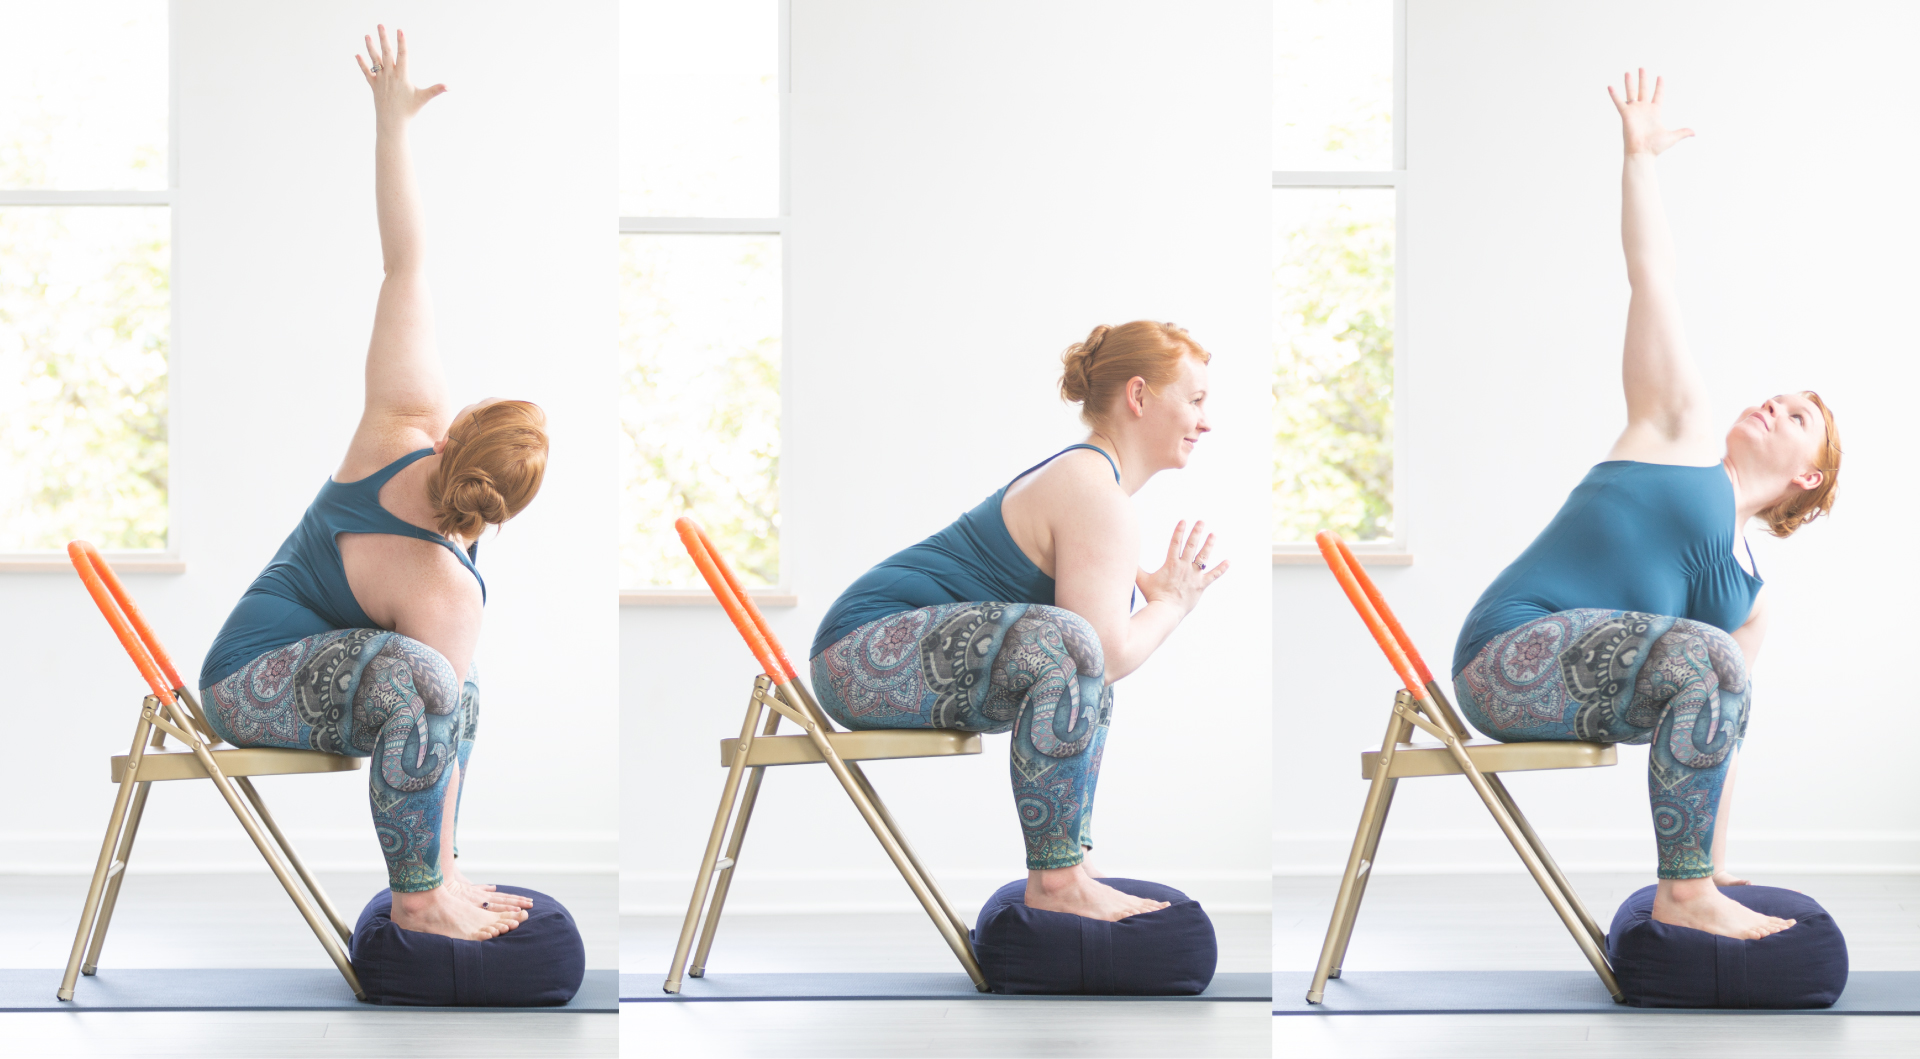 Try This Simple + Delicious Yoga Flow Sequence At Home